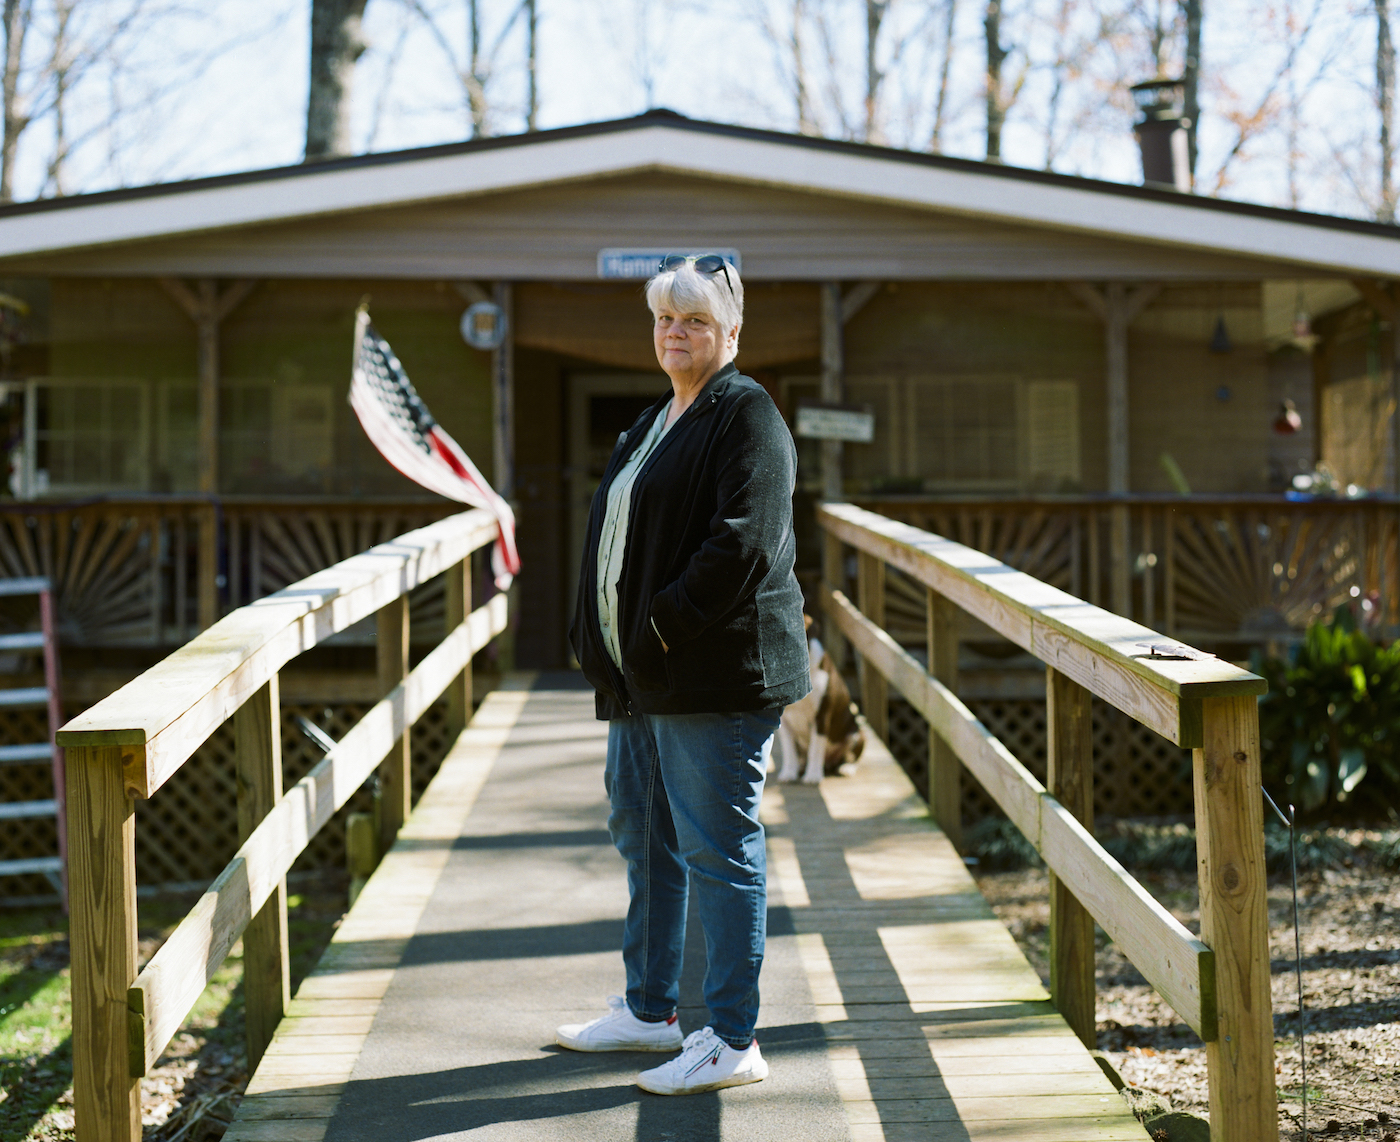 Gloria Hammond stands in front of her home on Luther Smith Road in Juliette, Georgia on February 17th, 2021.